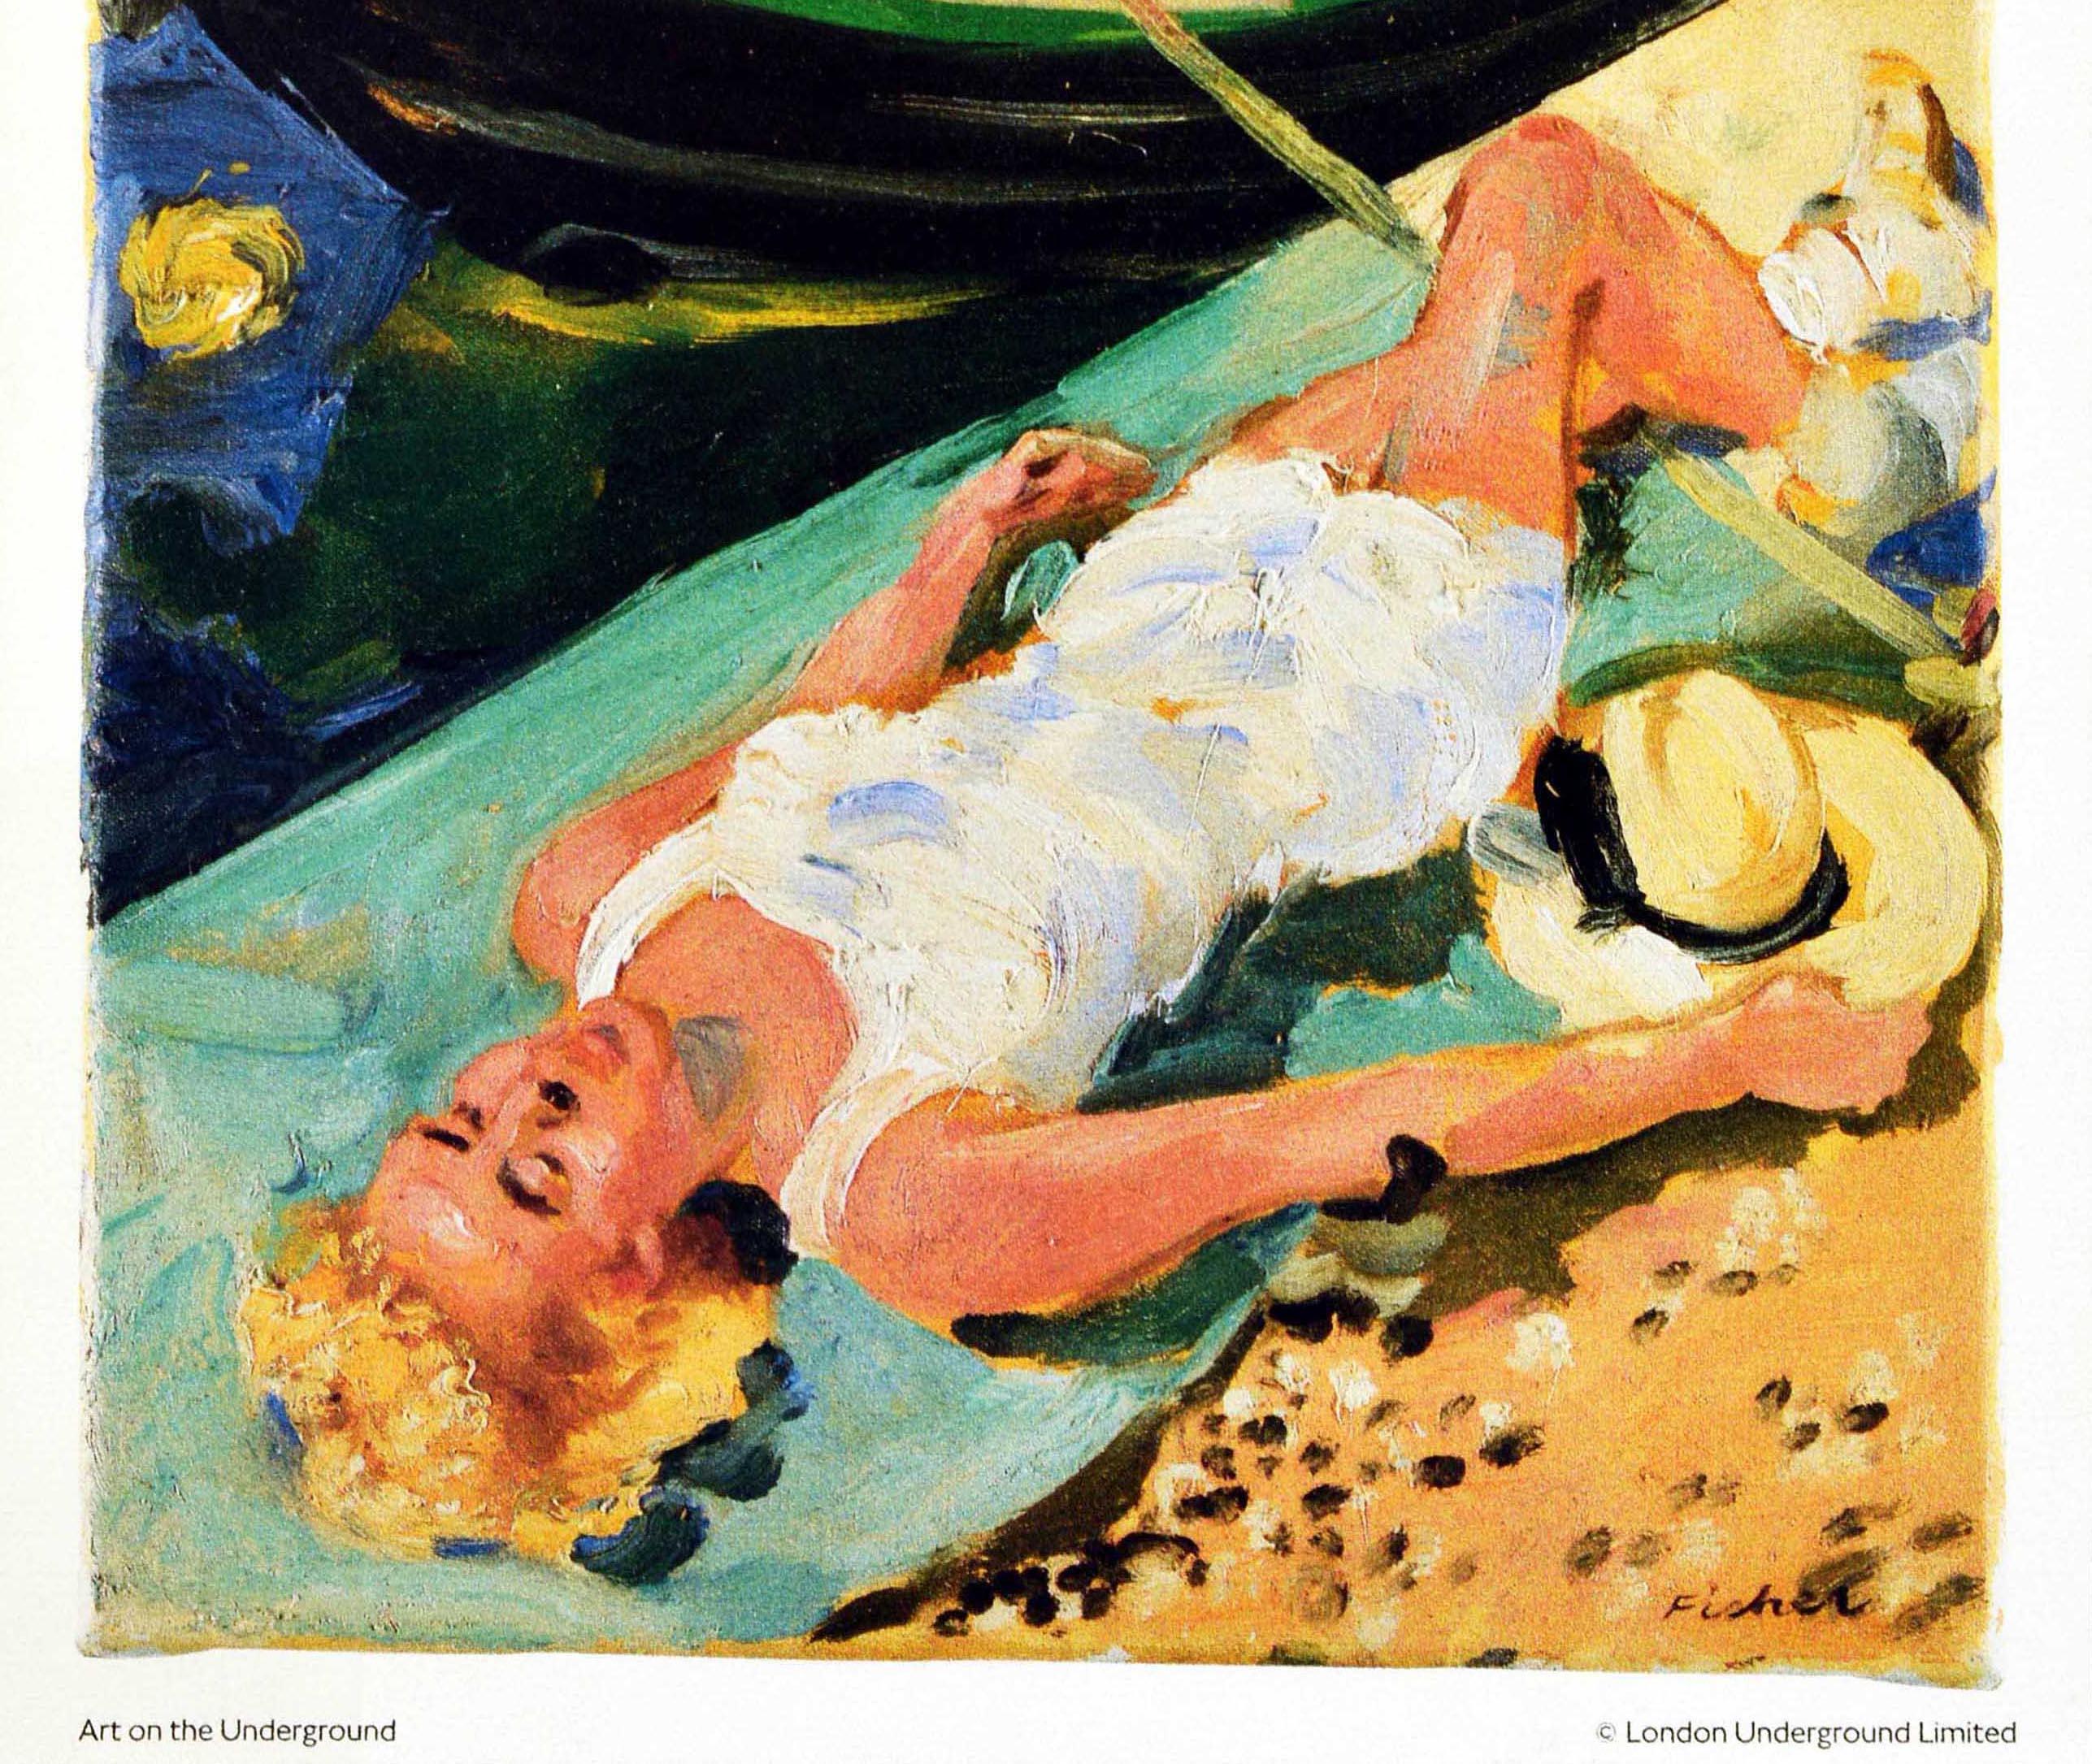 Original vintage London Underground poster - Lazy days, by tube at Little Venice. Nearest station: Warwick Avenue. Great image featuring a lady wearing a white outfit and holding a sun hat lying down sunbathing next to a canal boat on the water.